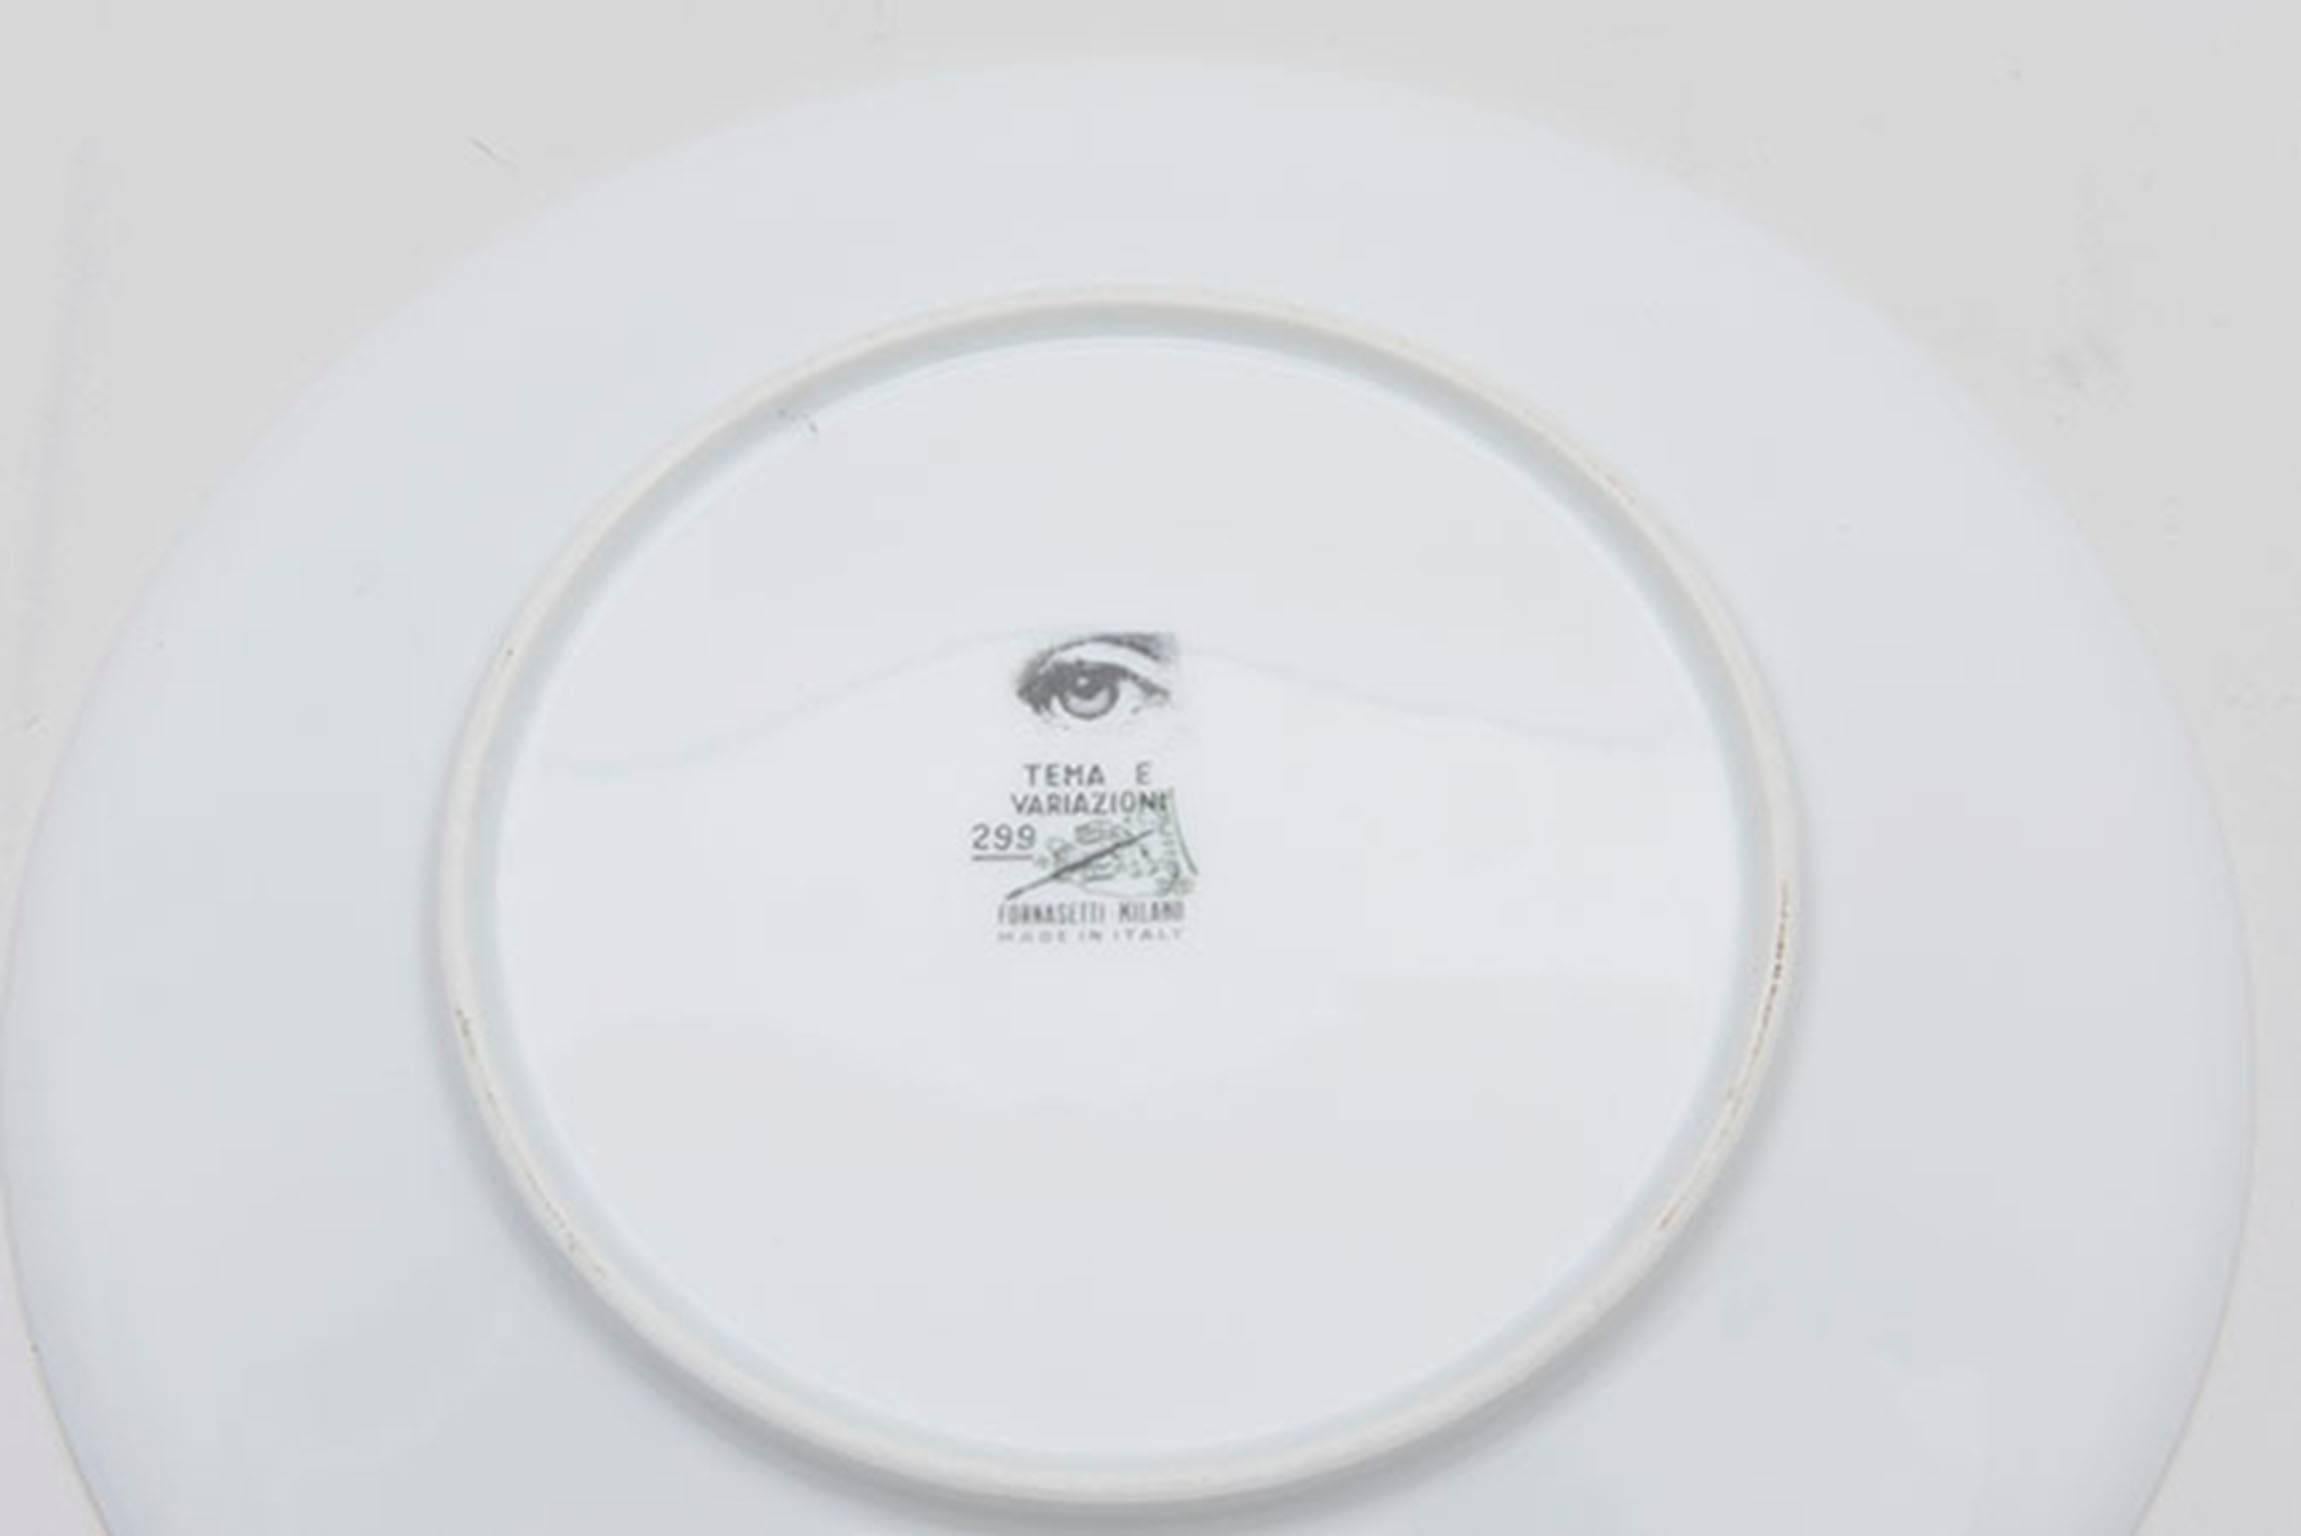 Early Themes and variations plate designed by Piero Fornasetti. Fine white porcelain with black and white lithographic illustration. Underside of plate with 